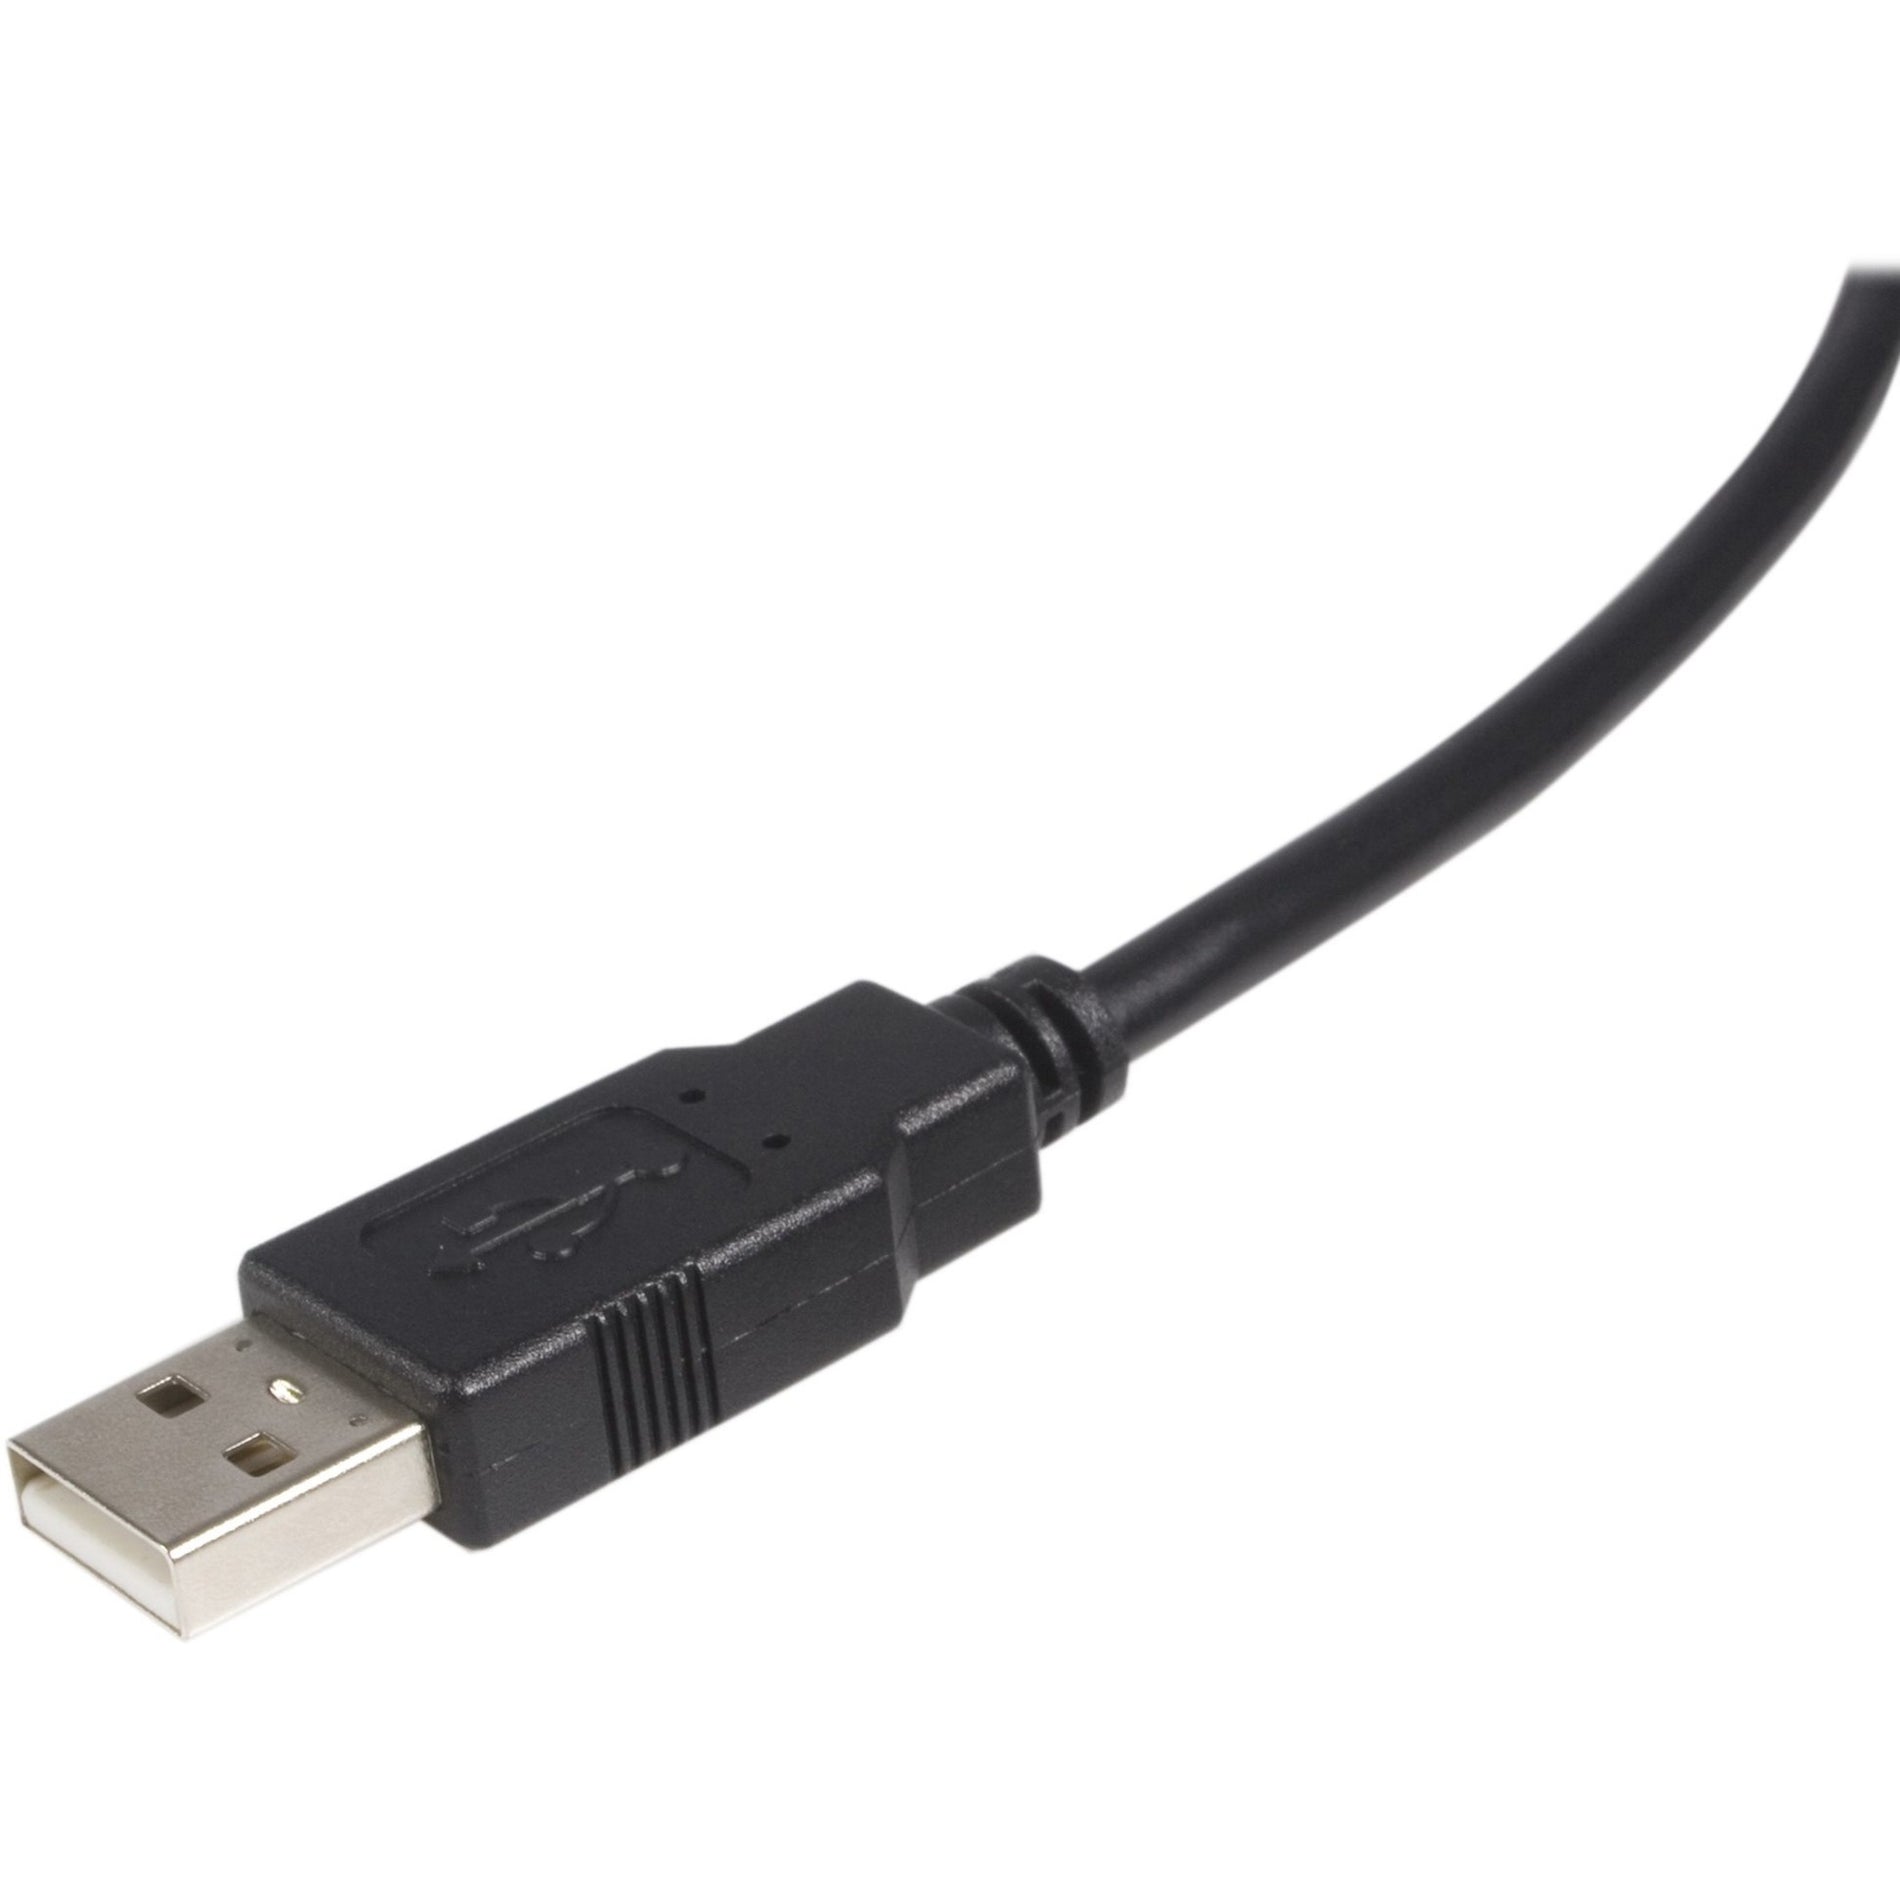 StarTech.com USB2HAB1 1 ft USB 2.0 A to B Cable - M/M, High-Speed Data Transfer, Copper Conductor, 480 Mbit/s Data Transfer Rate, Black